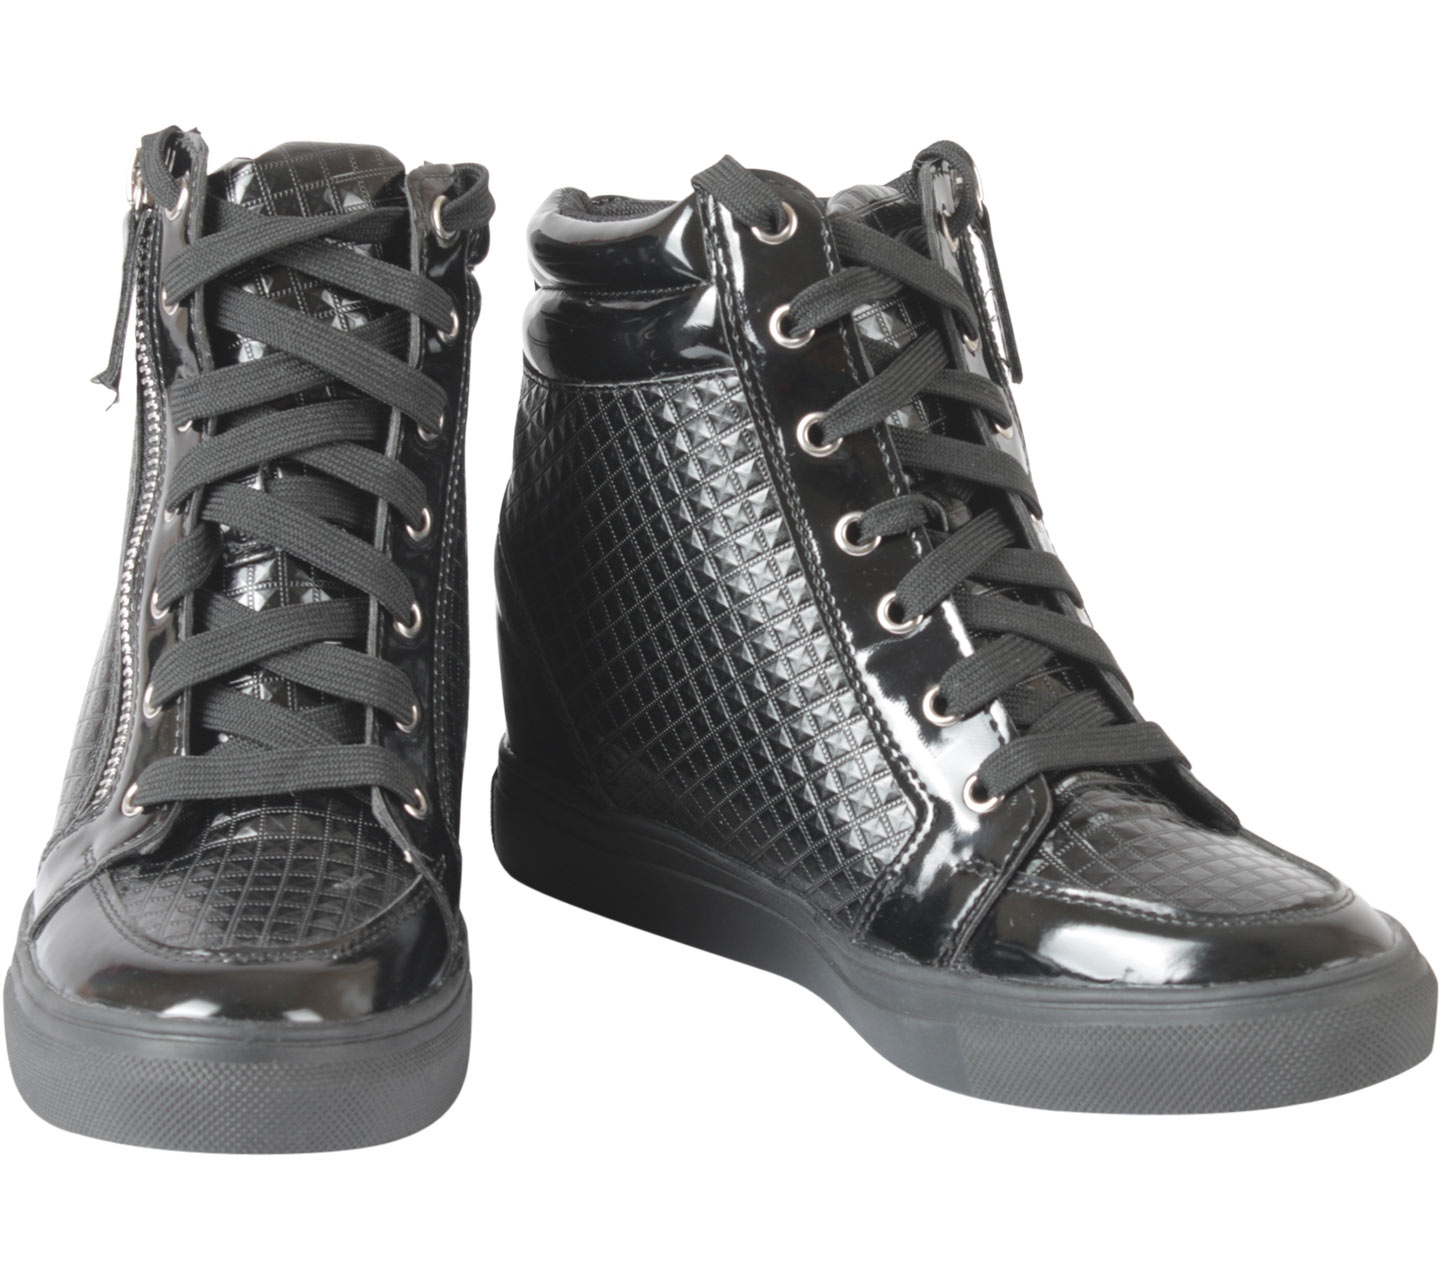 Tracce Black Wedges Sneakers